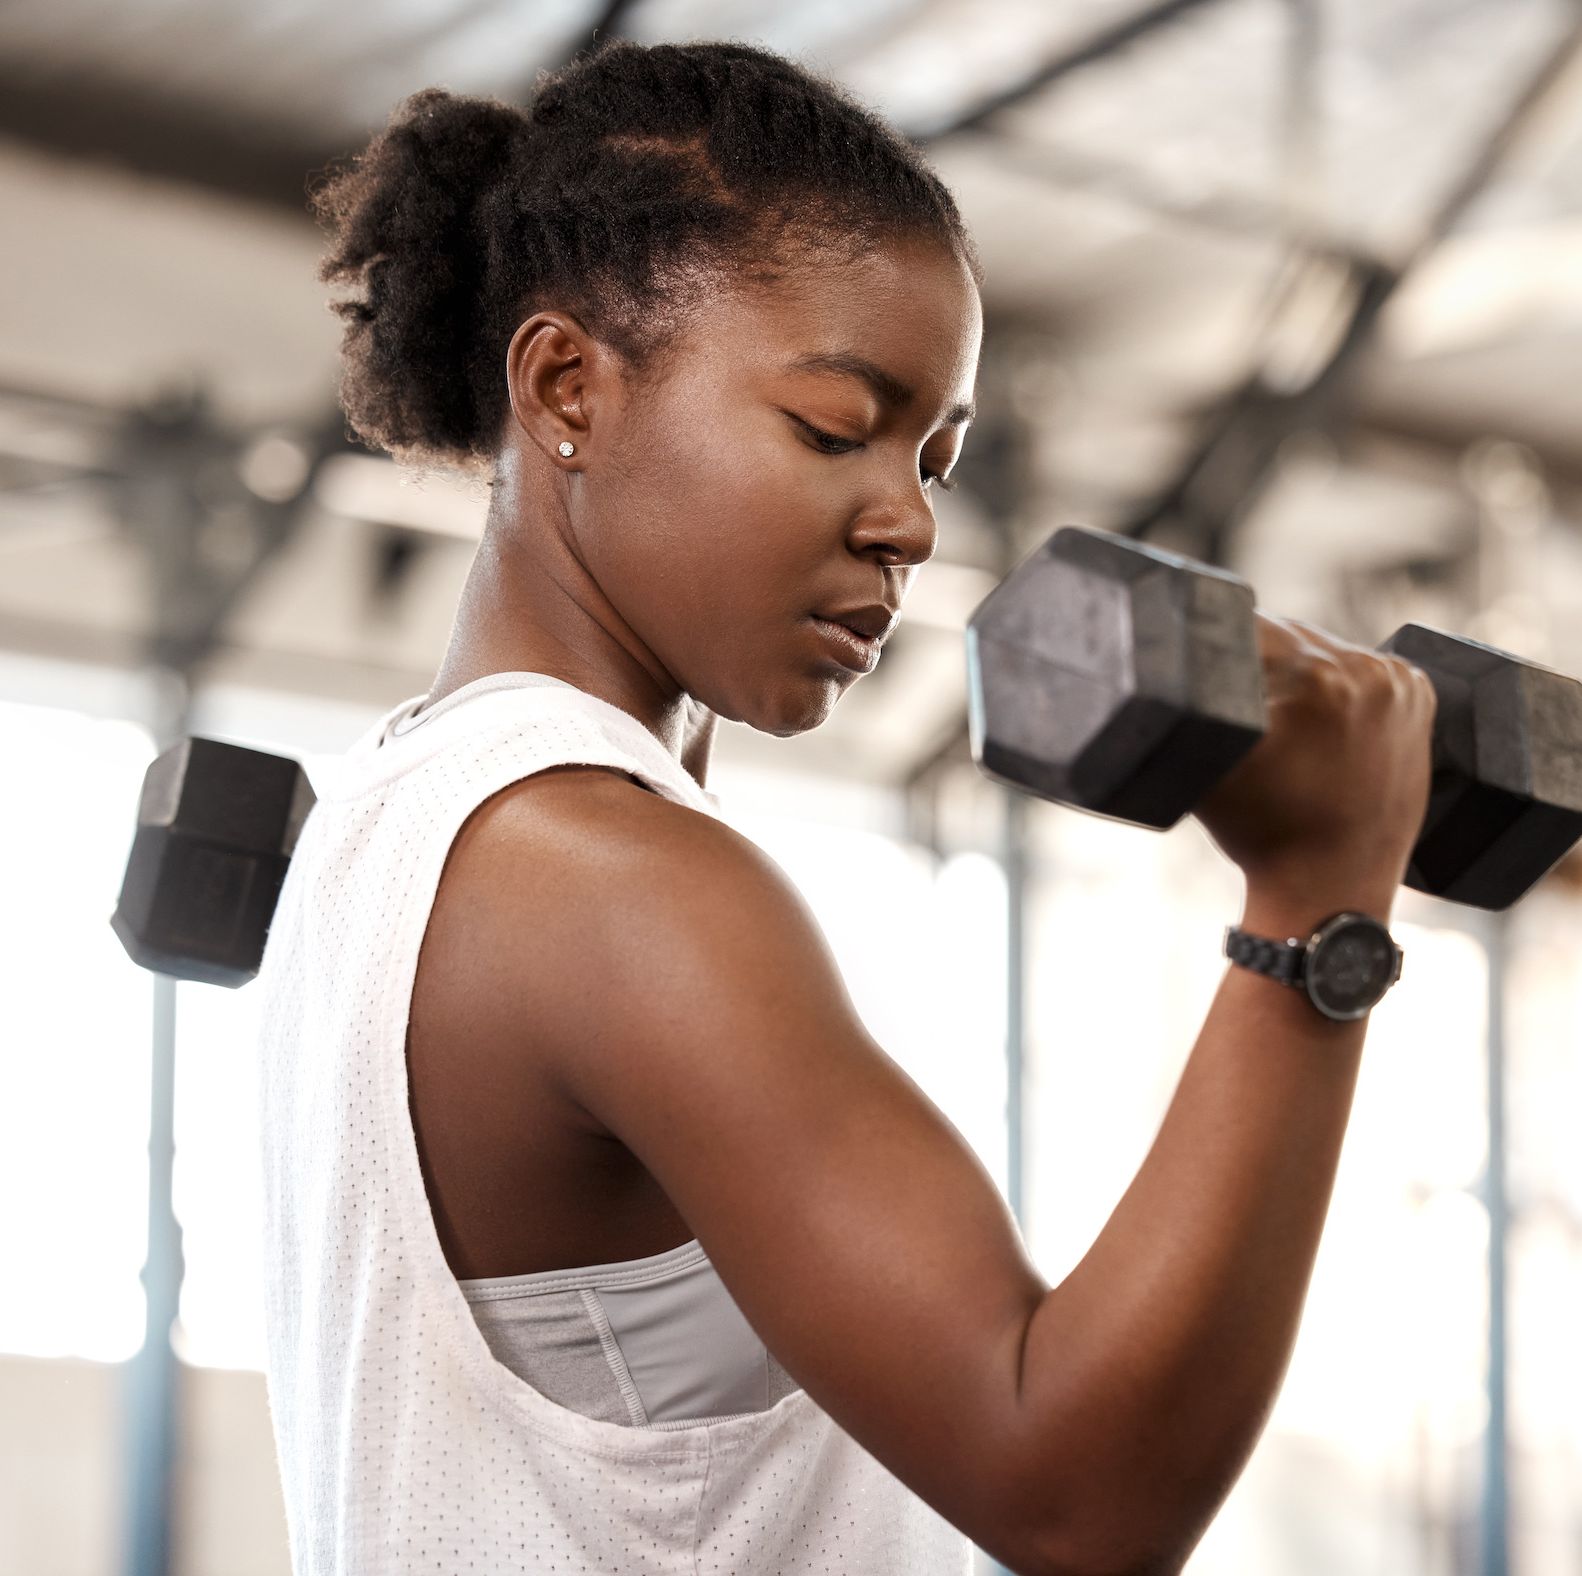 Dumbbell Exercises for Arms that Tighten, Tone and Boost Strength